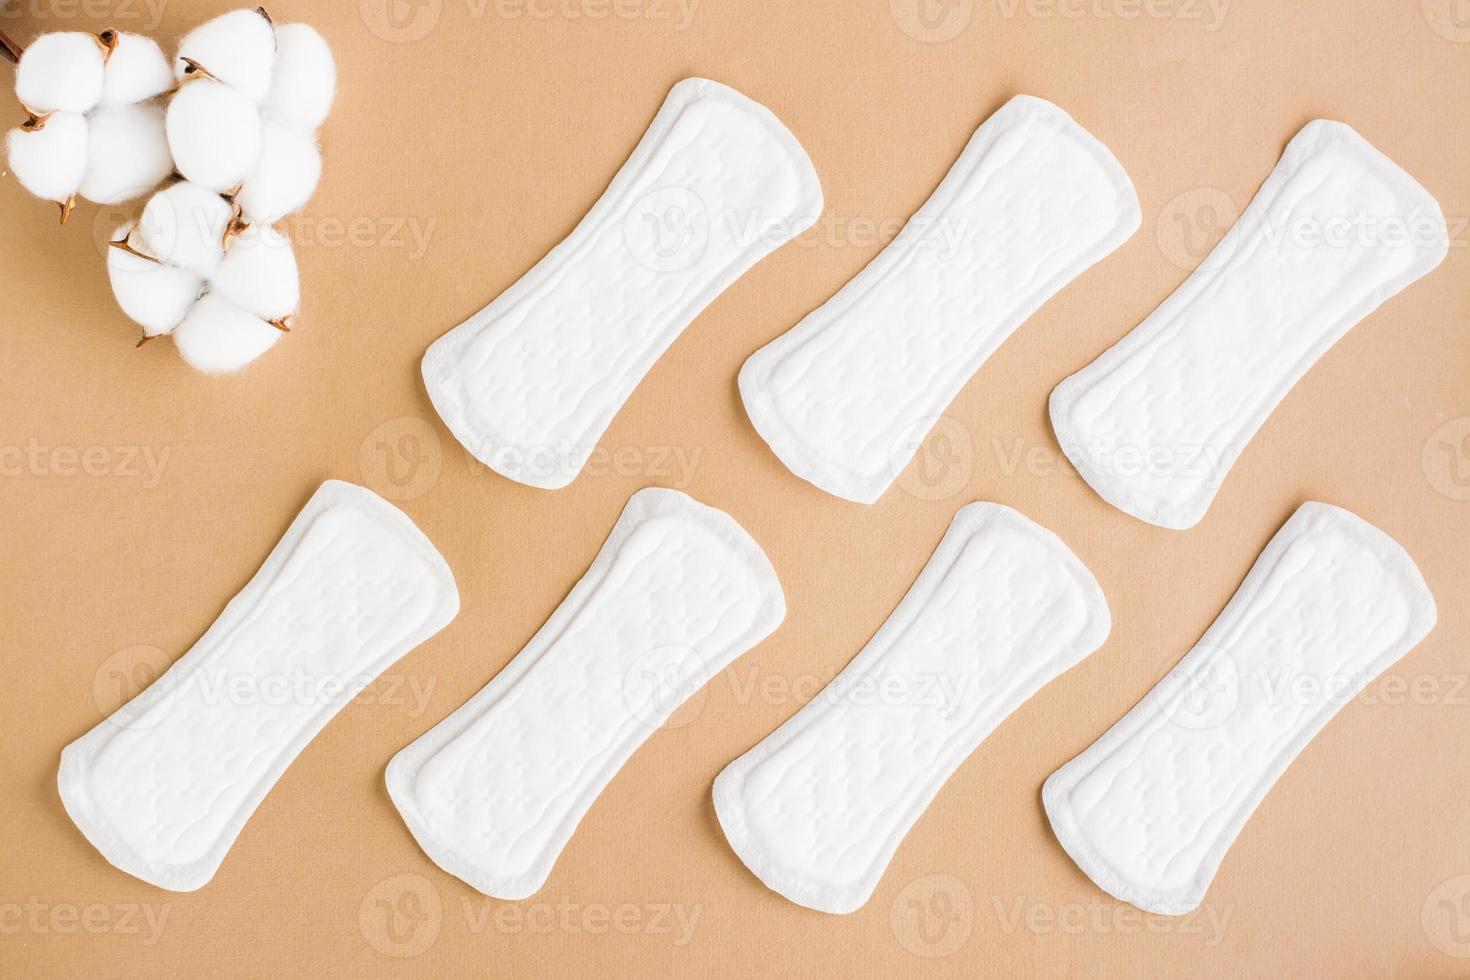 A pattern of clean disposable sanitary pads and a branch of cotton on a beige background. Women's health and comfort concept. Top view photo